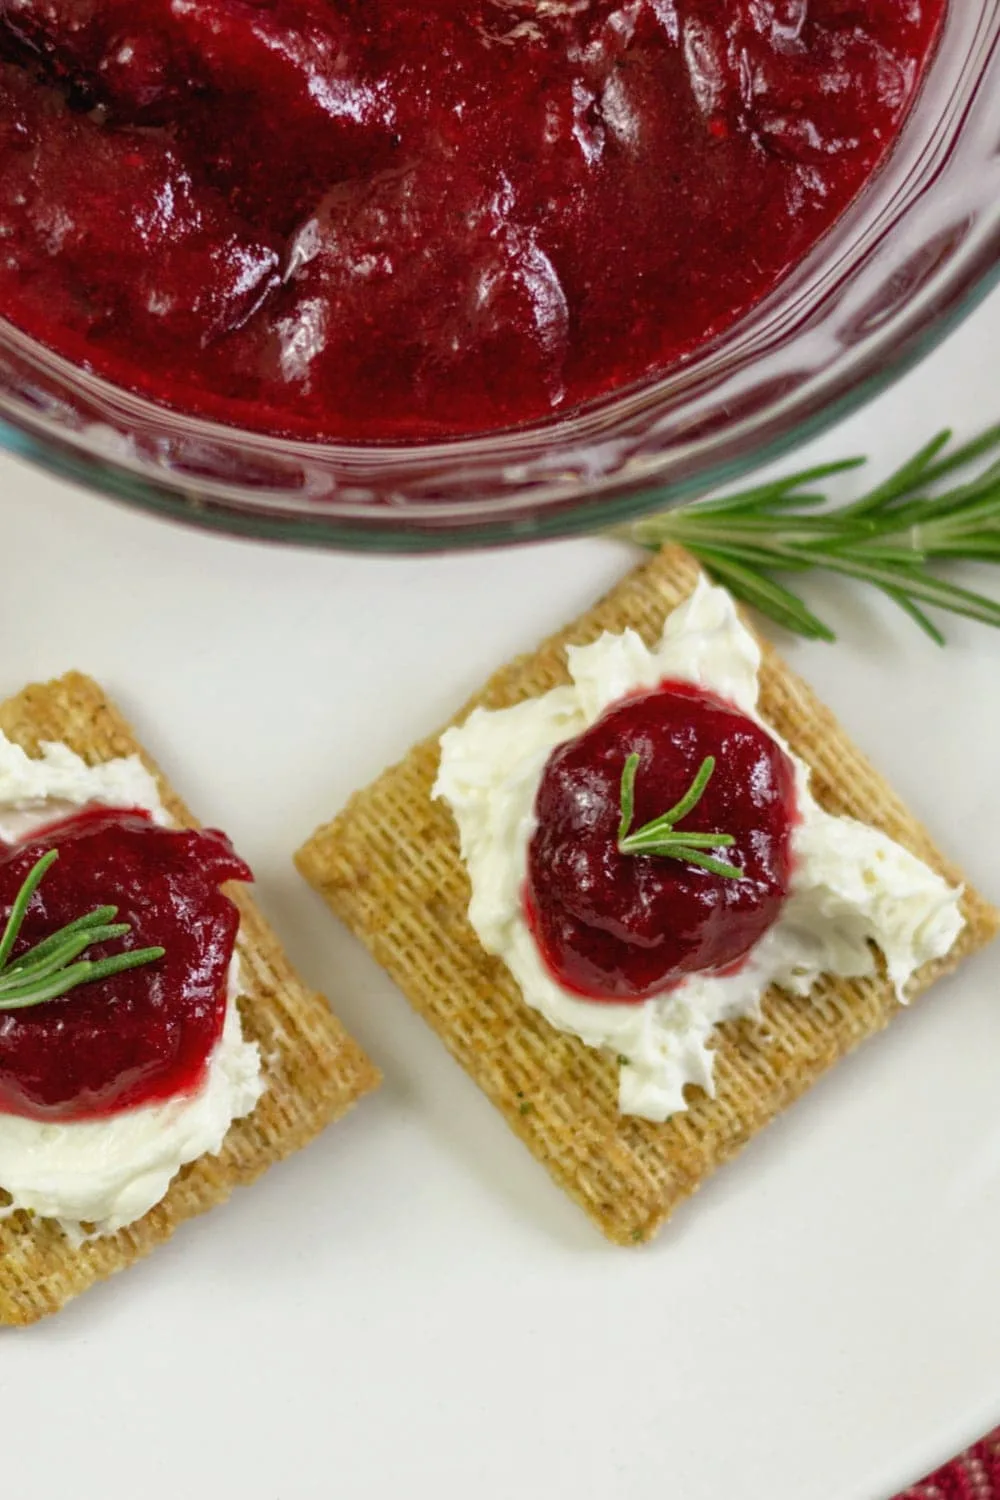 Homemade cranberry jam recipe served on Triscuit crackers with cream cheese.